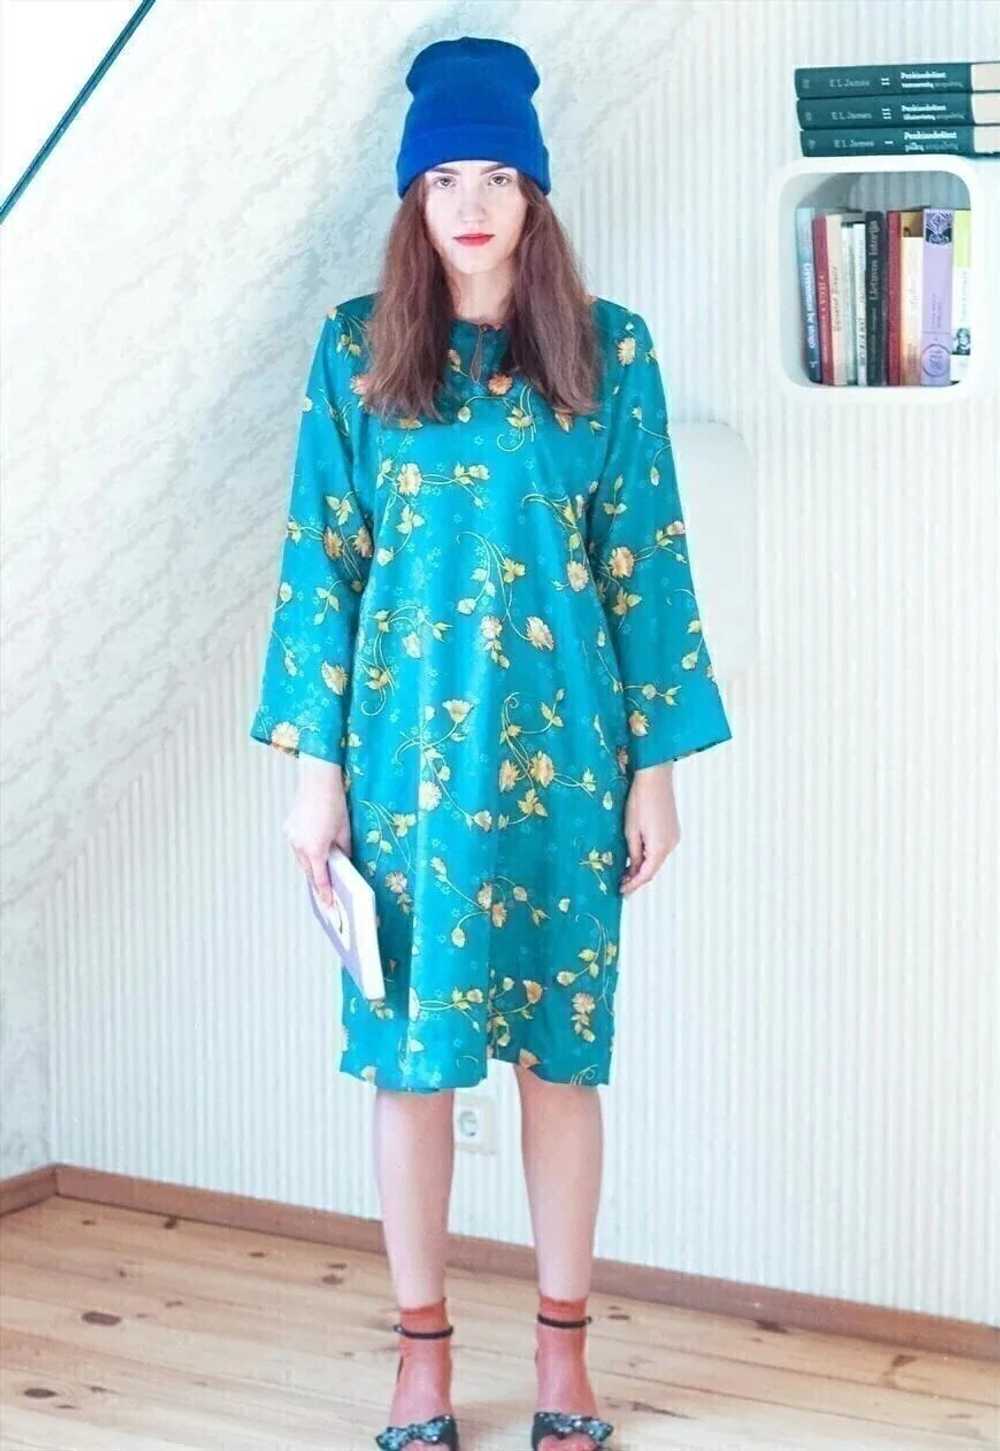 Bright teal blue long sleeve silky floral dress - image 3